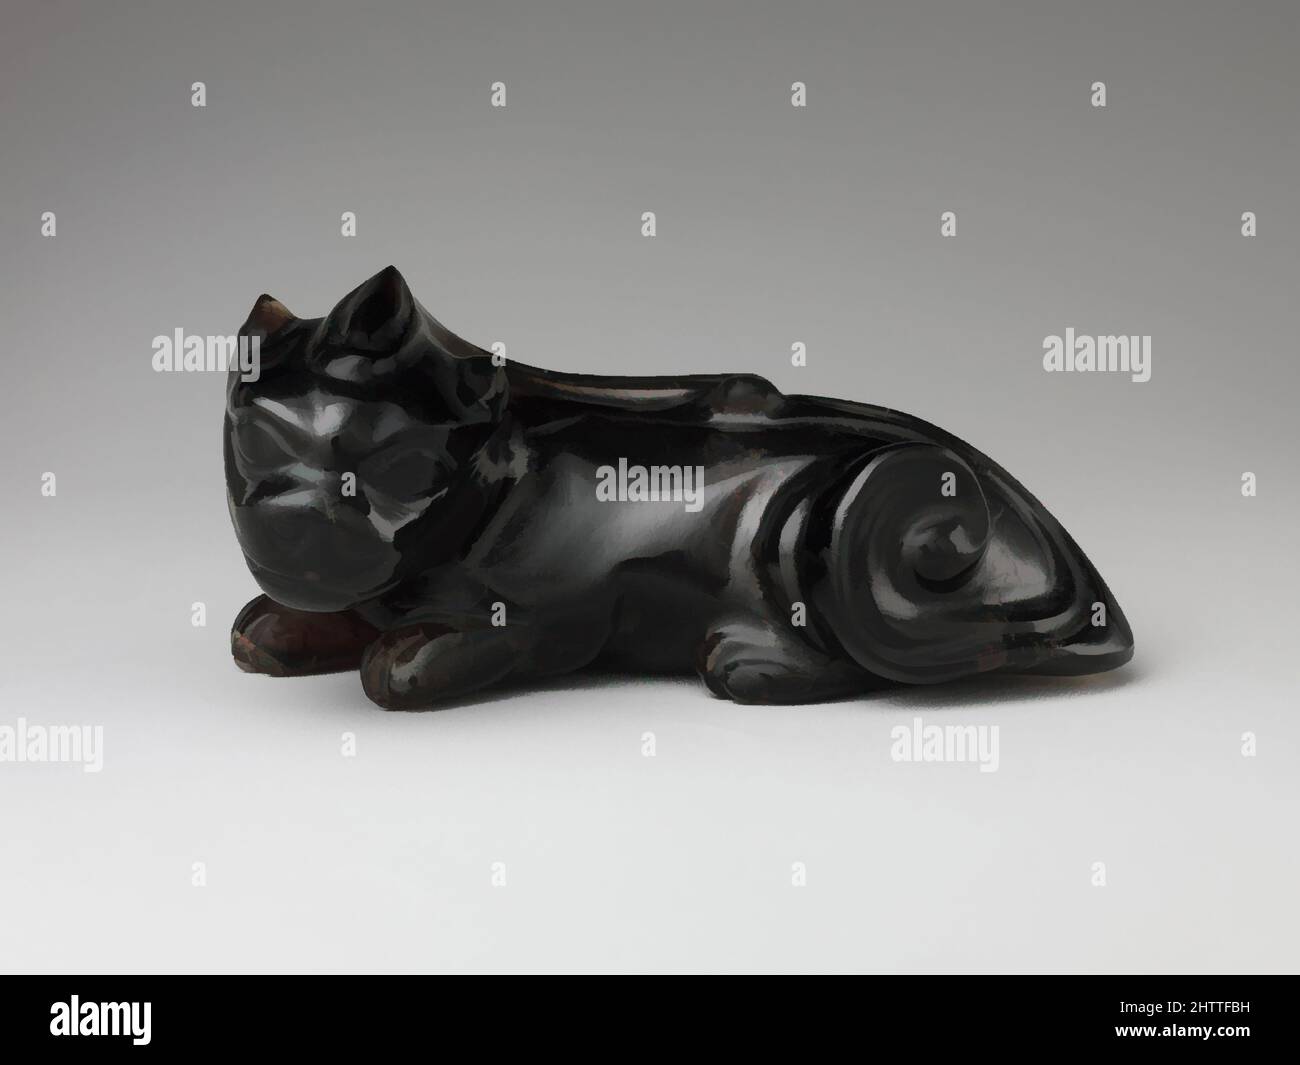 Art inspired by 清 墨晶瑞獸, Figure of a fantastic animal, Qing dynasty (1644–1911), China, Black crystal, H. 4 1/2 in. (11.4 cm); W. 2 1/8 in. (5.4 cm), Hardstone, Classic works modernized by Artotop with a splash of modernity. Shapes, color and value, eye-catching visual impact on art. Emotions through freedom of artworks in a contemporary way. A timeless message pursuing a wildly creative new direction. Artists turning to the digital medium and creating the Artotop NFT Stock Photo